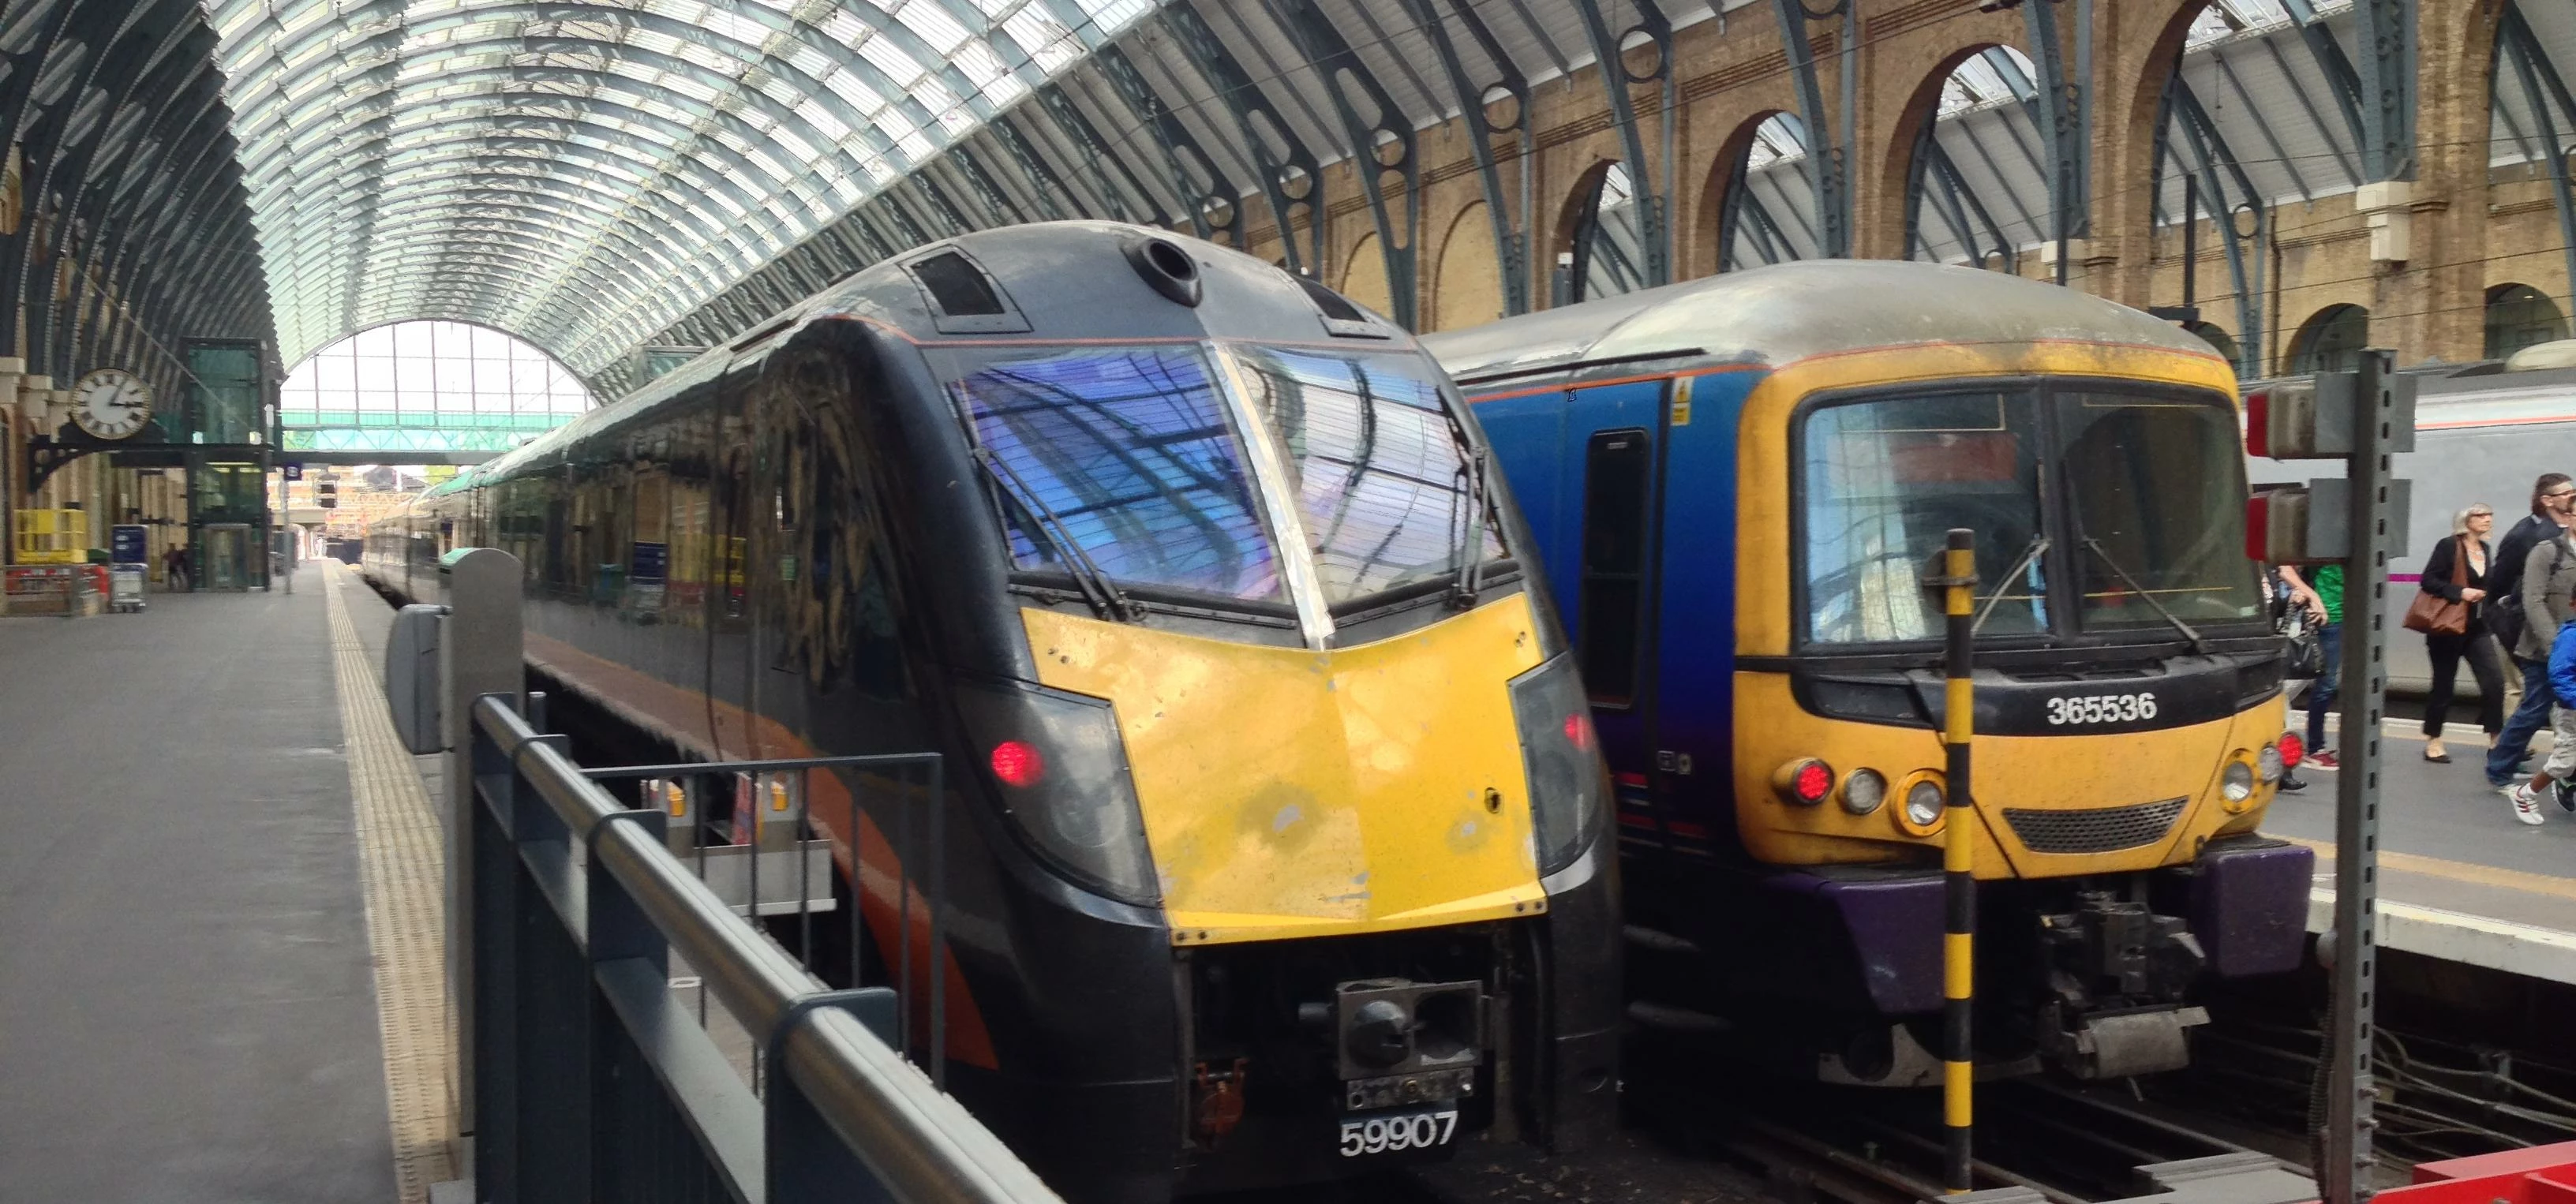 180107 and 365536 at London King's Cross